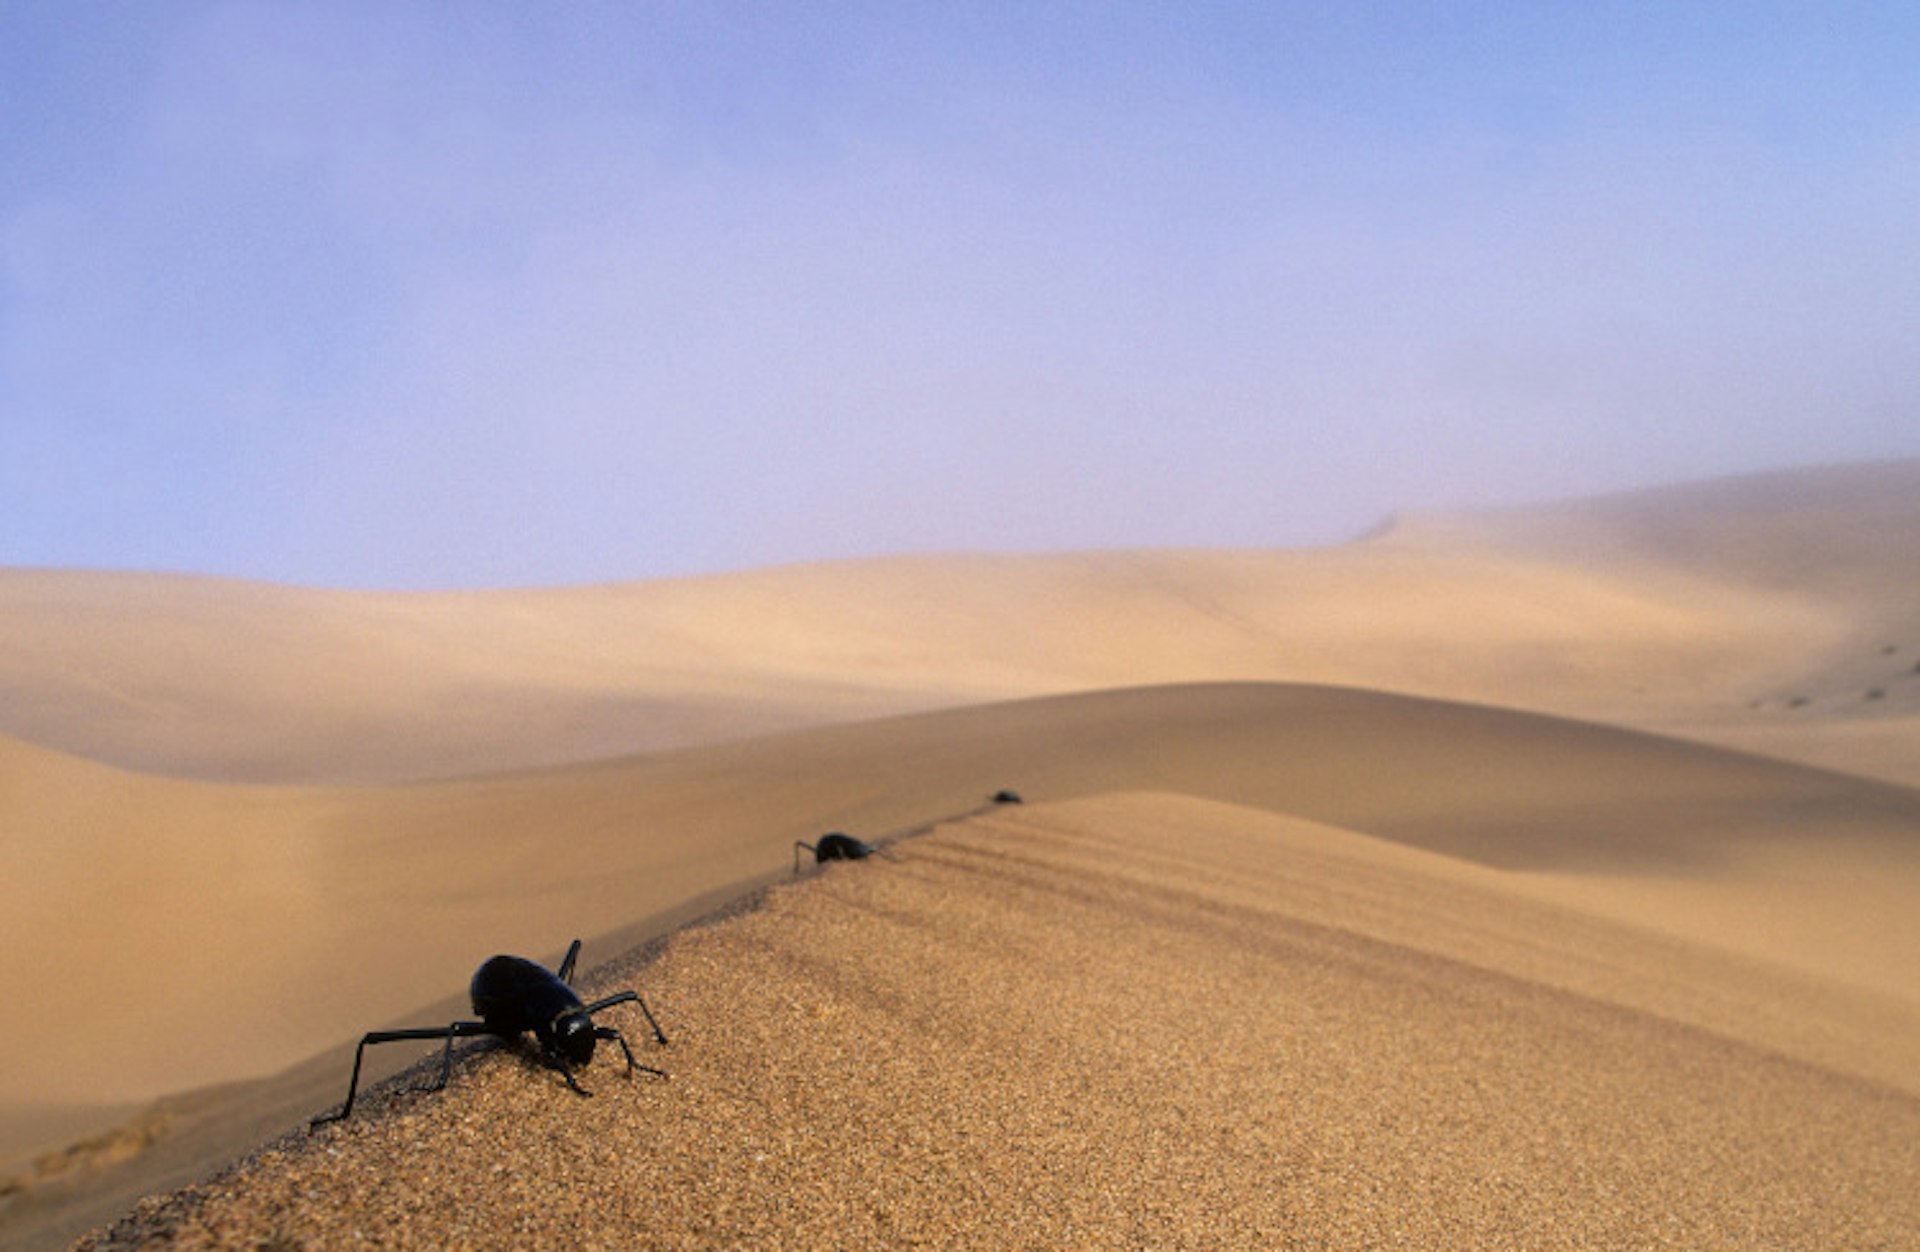 Fog-basking beetles atop a dune in the Namib Desert, Namibia. Image by Nigel Dennis / Getty Images